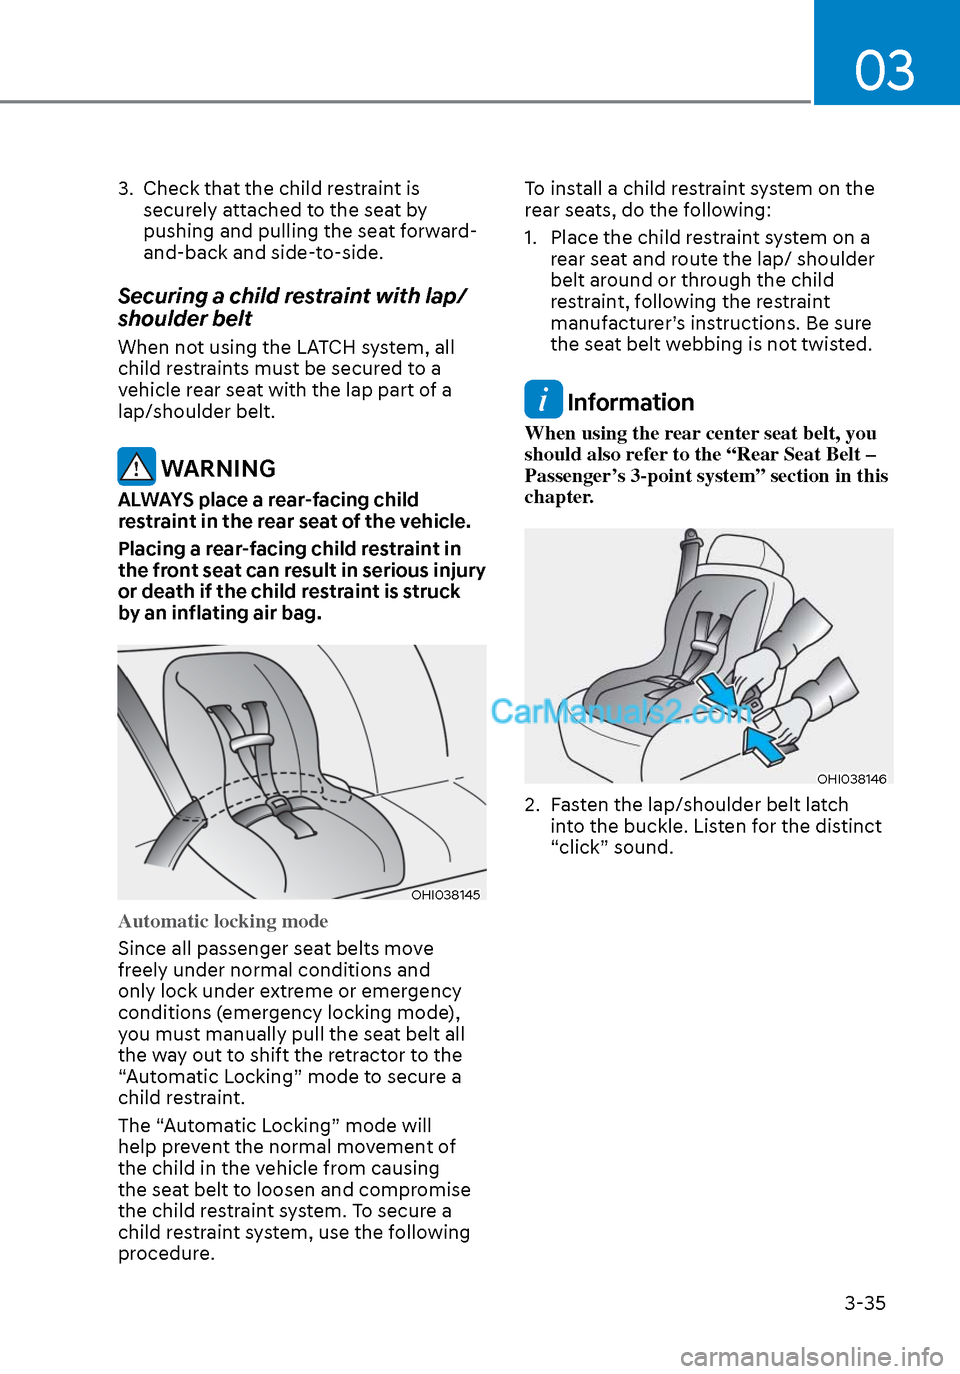 Hyundai Sonata 2020 Repair Manual 03
3-35
3.  Check that the child restraint is securely attached to the seat by 
pushing and pulling the seat forward-
and-back and side-to-side.
Securing a child restraint with lap/
shoulder belt
When